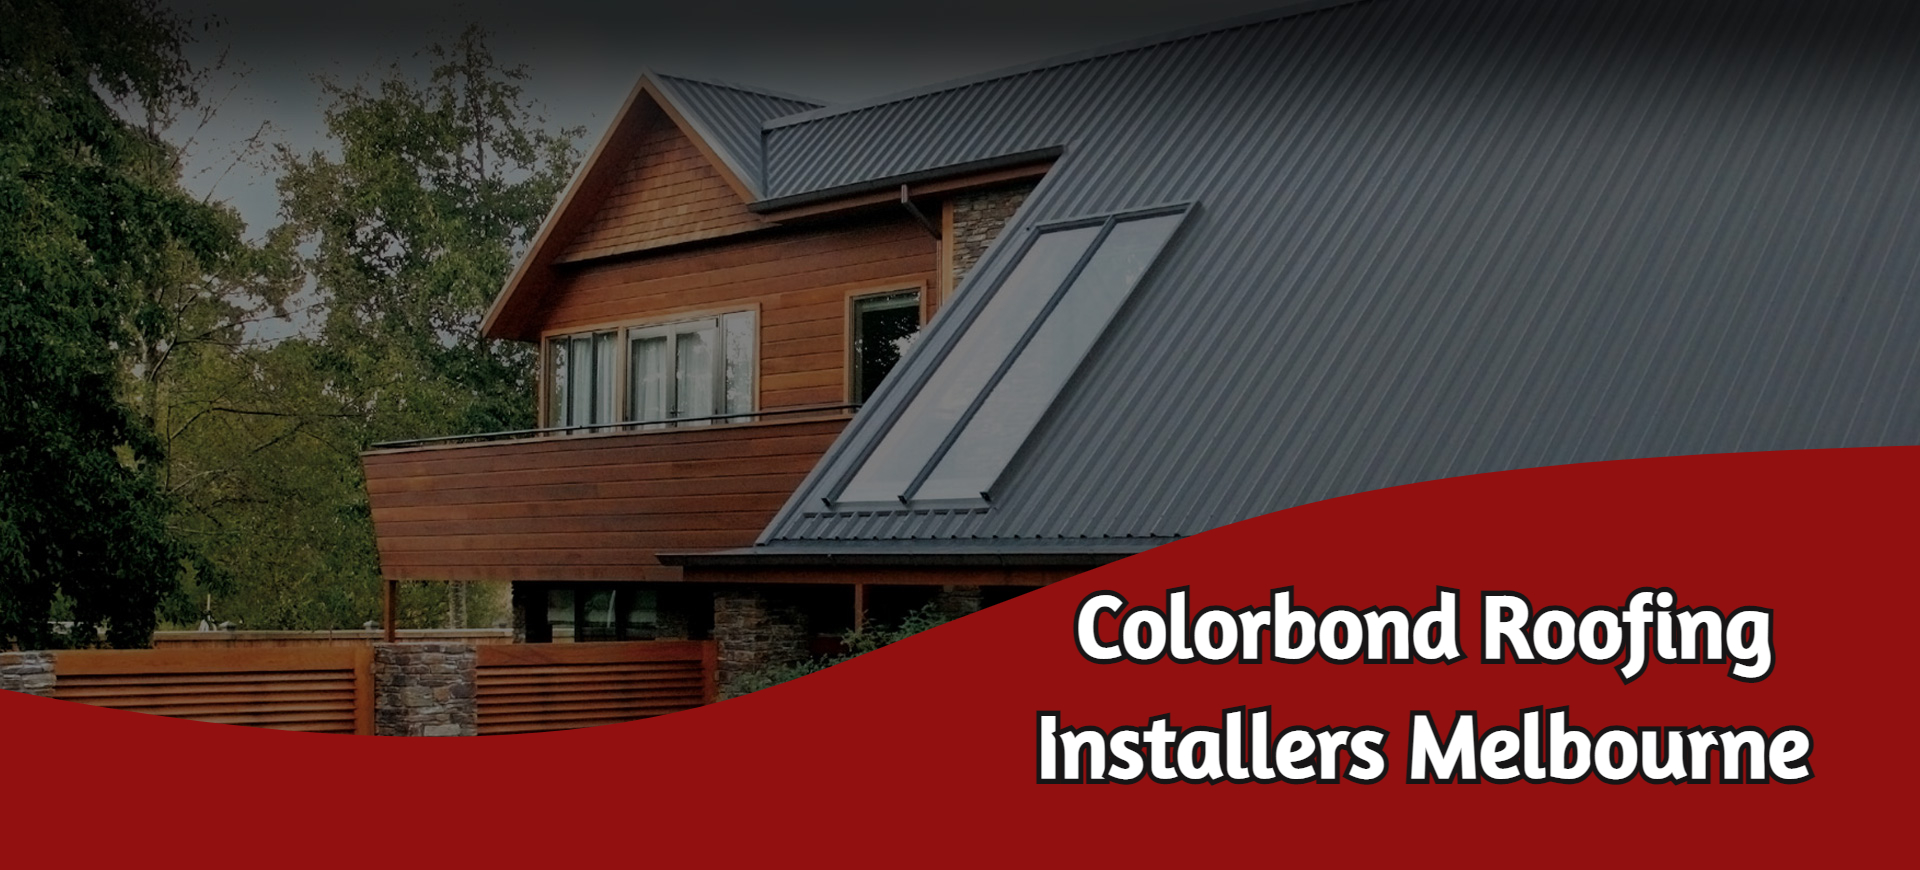 Colorbond Roofing Installers Melbourne 